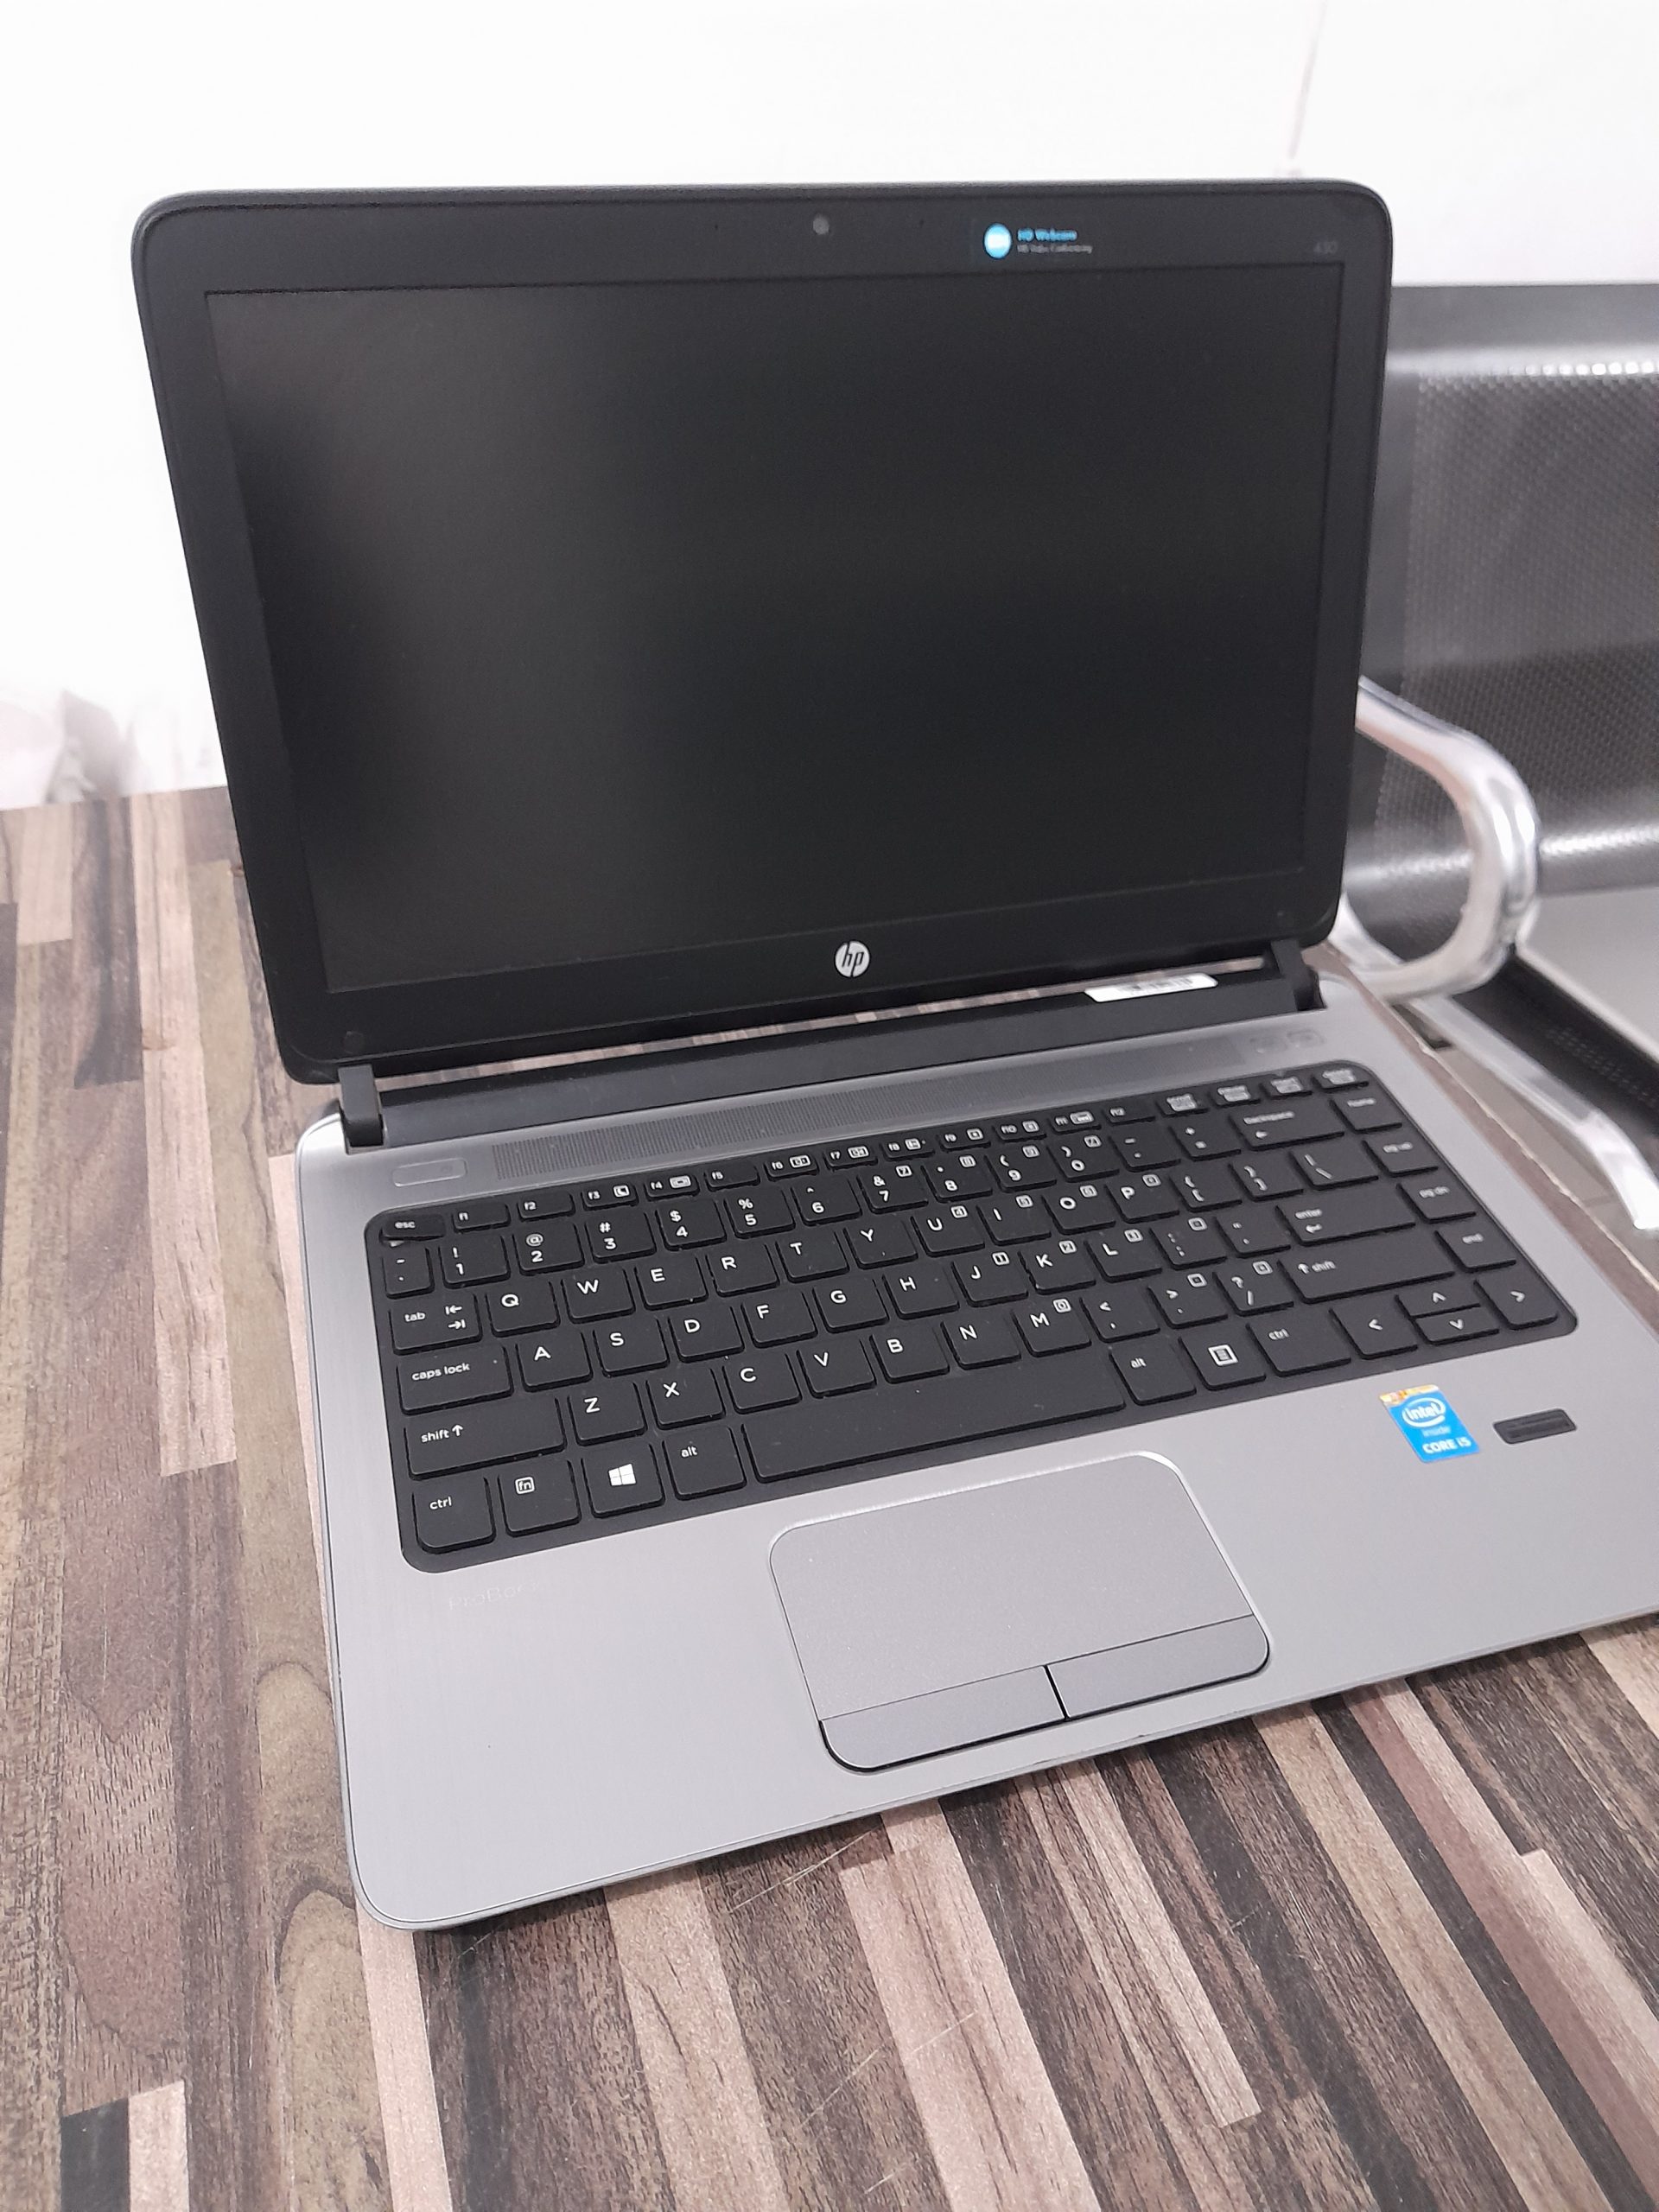 hp PROBOOK 430 G2 4TH generation for sale in lagos nigeria, uk used laptops for sale , laptop for sale, latest price for used laptops in lagos nigeria, price for used hp 840 g3 g3 in lagos , affordable HP 840 g3 g3 FOR SALE in lagos, laptop whole sale shop in lagos , whole sale laptop warehouse in lagos, laptop warehouse in ikeja computer village, laptop ware house in nigeria laptop ware house for hp PROBOOK 430 G2 g3,